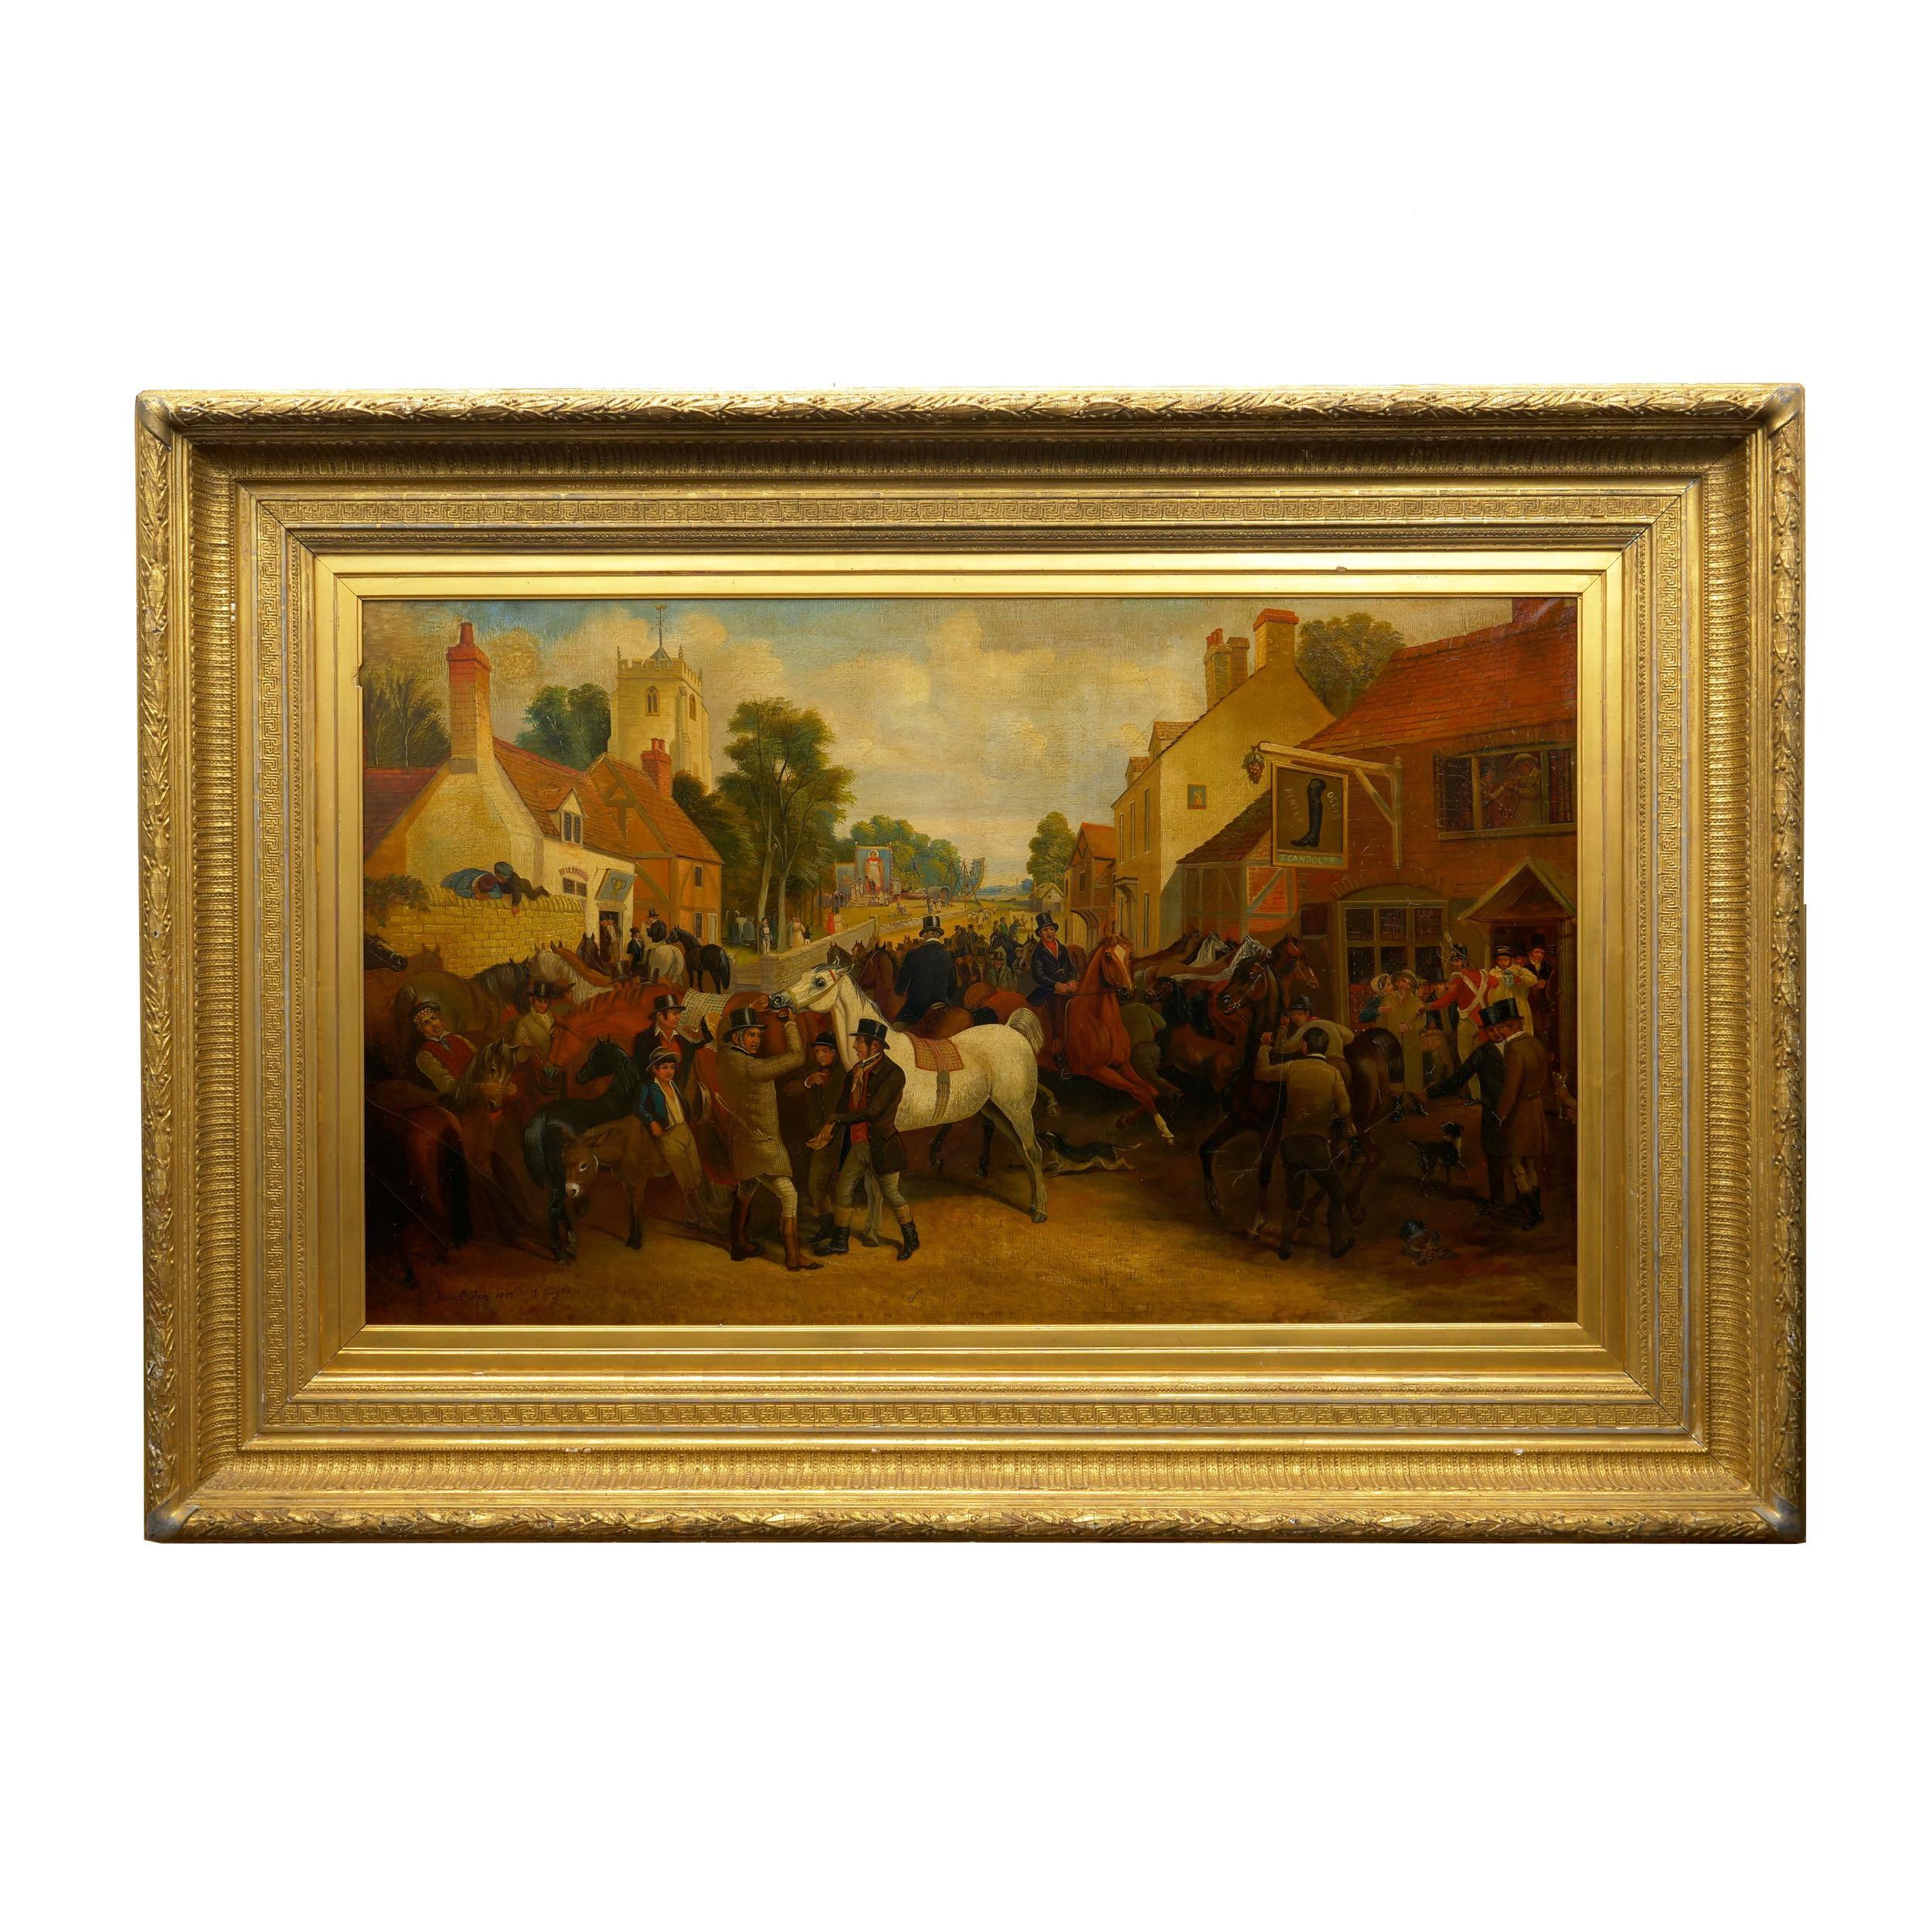 A very substantial work by Thomas Smythe, unusually large in dimension compared to the majority of work he completed for the public, the vivid and lively scene is executed in oil on canvas and captures the annual Barnet Fair as it happened in